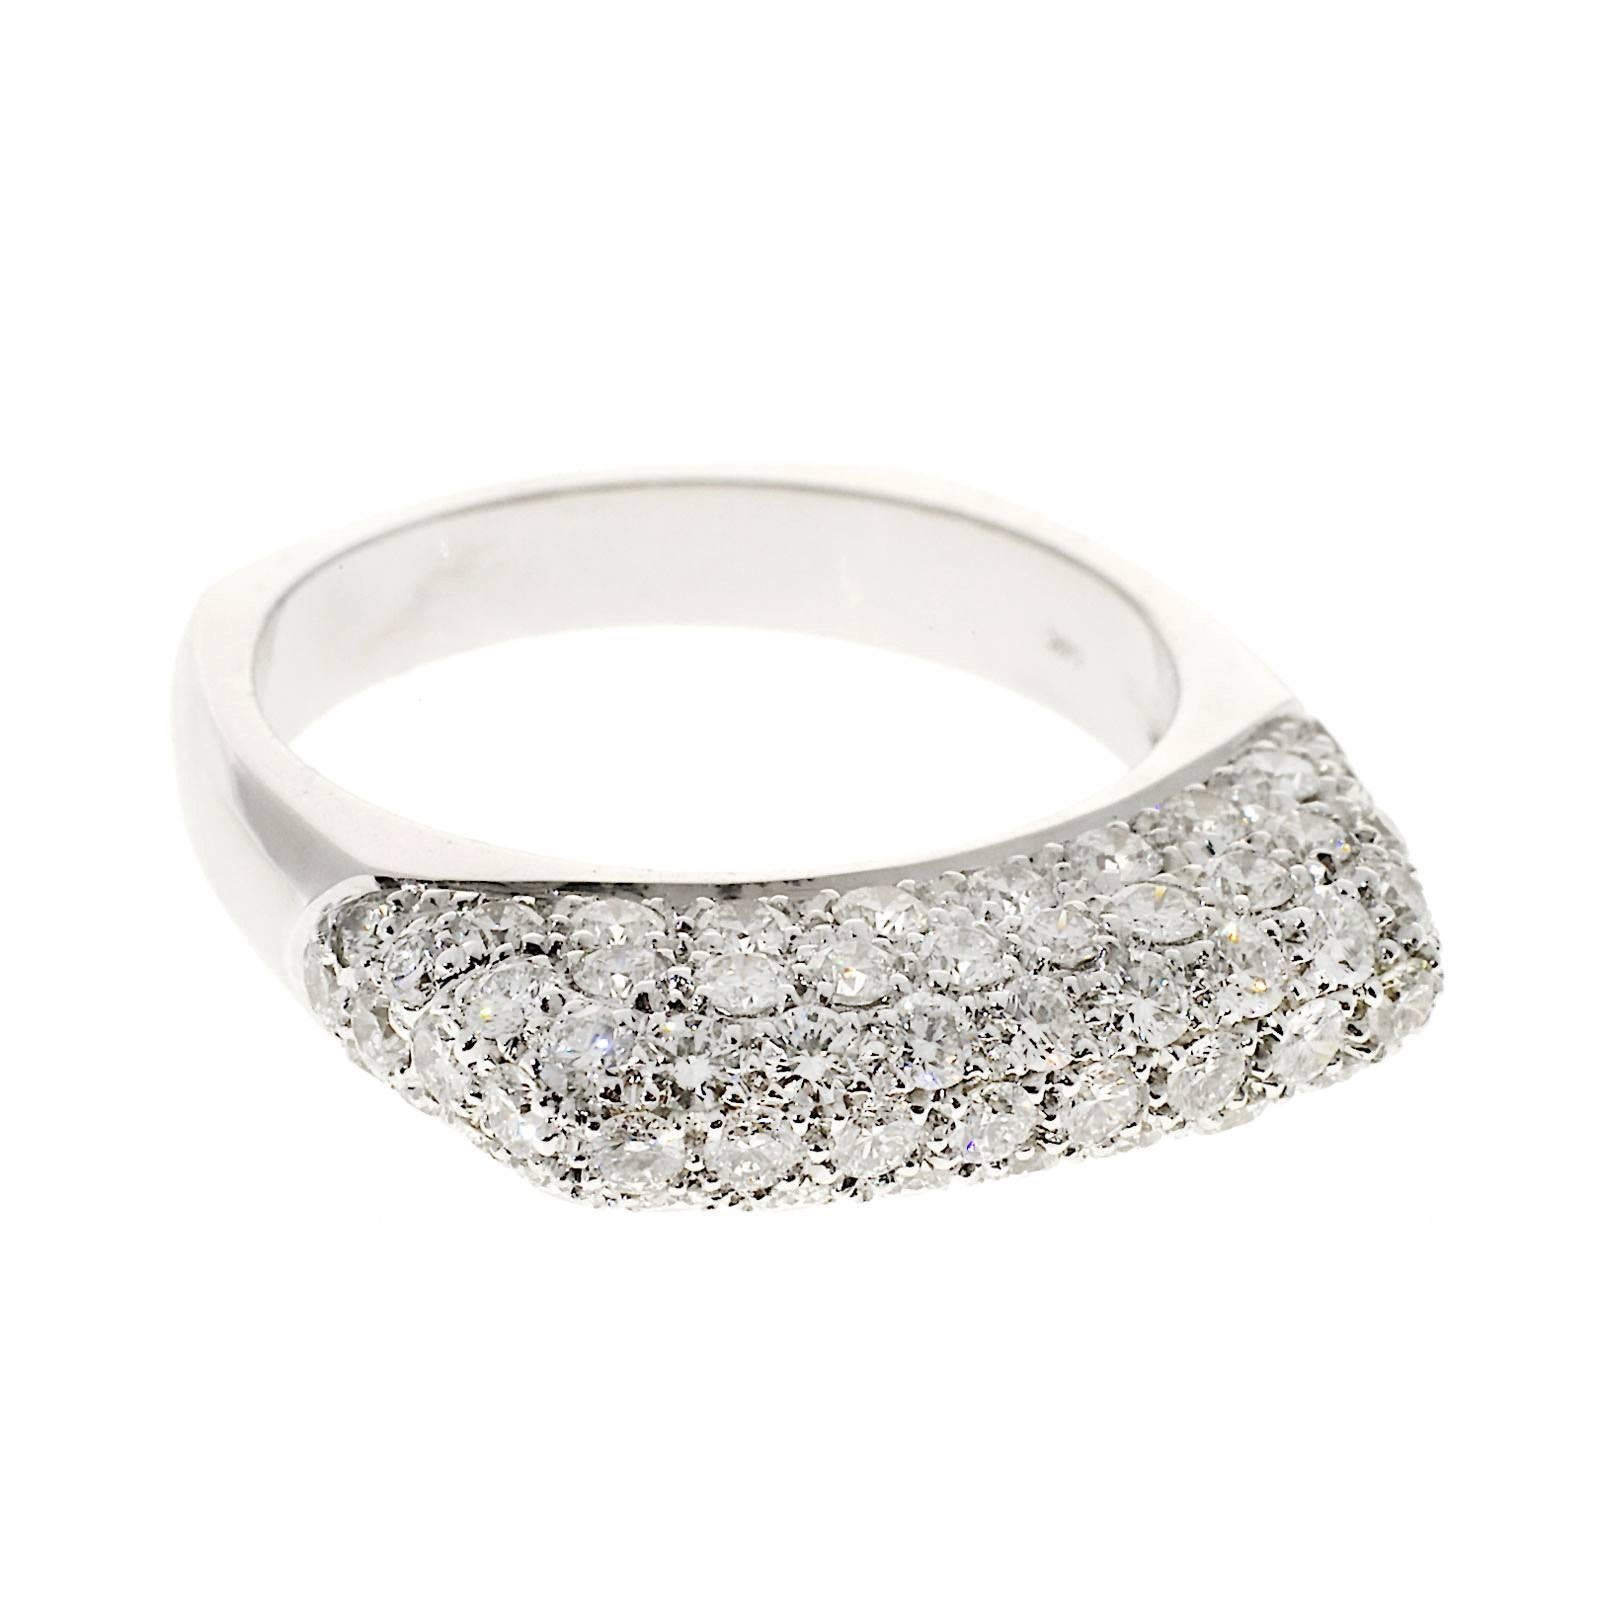 Handmade pave diamond domed 14k white gold setting. 

Approx. 70 full cut diamonds, approx. total weight 1.07cts, F, VS1 to VS2
14k White Gold
Stamped: 14k
4.7 grams
Width at top: 4.8mm
Height at top: 6mm
Width at bottom: 3.4mm
Size 6 3/4 and sizable